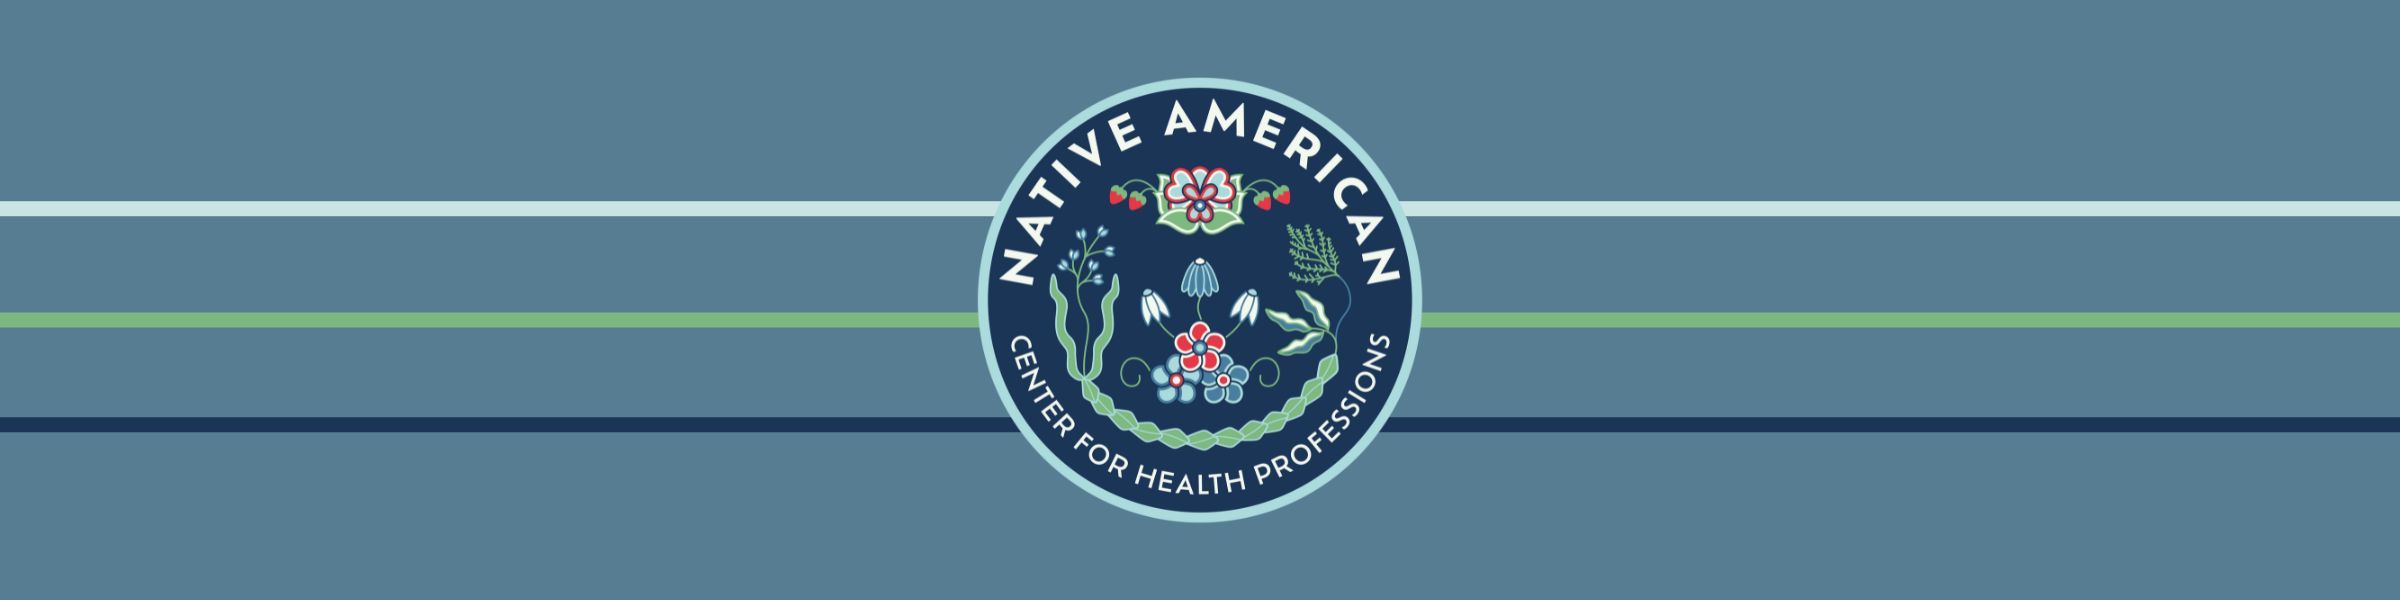 Native American Center for Health Professions